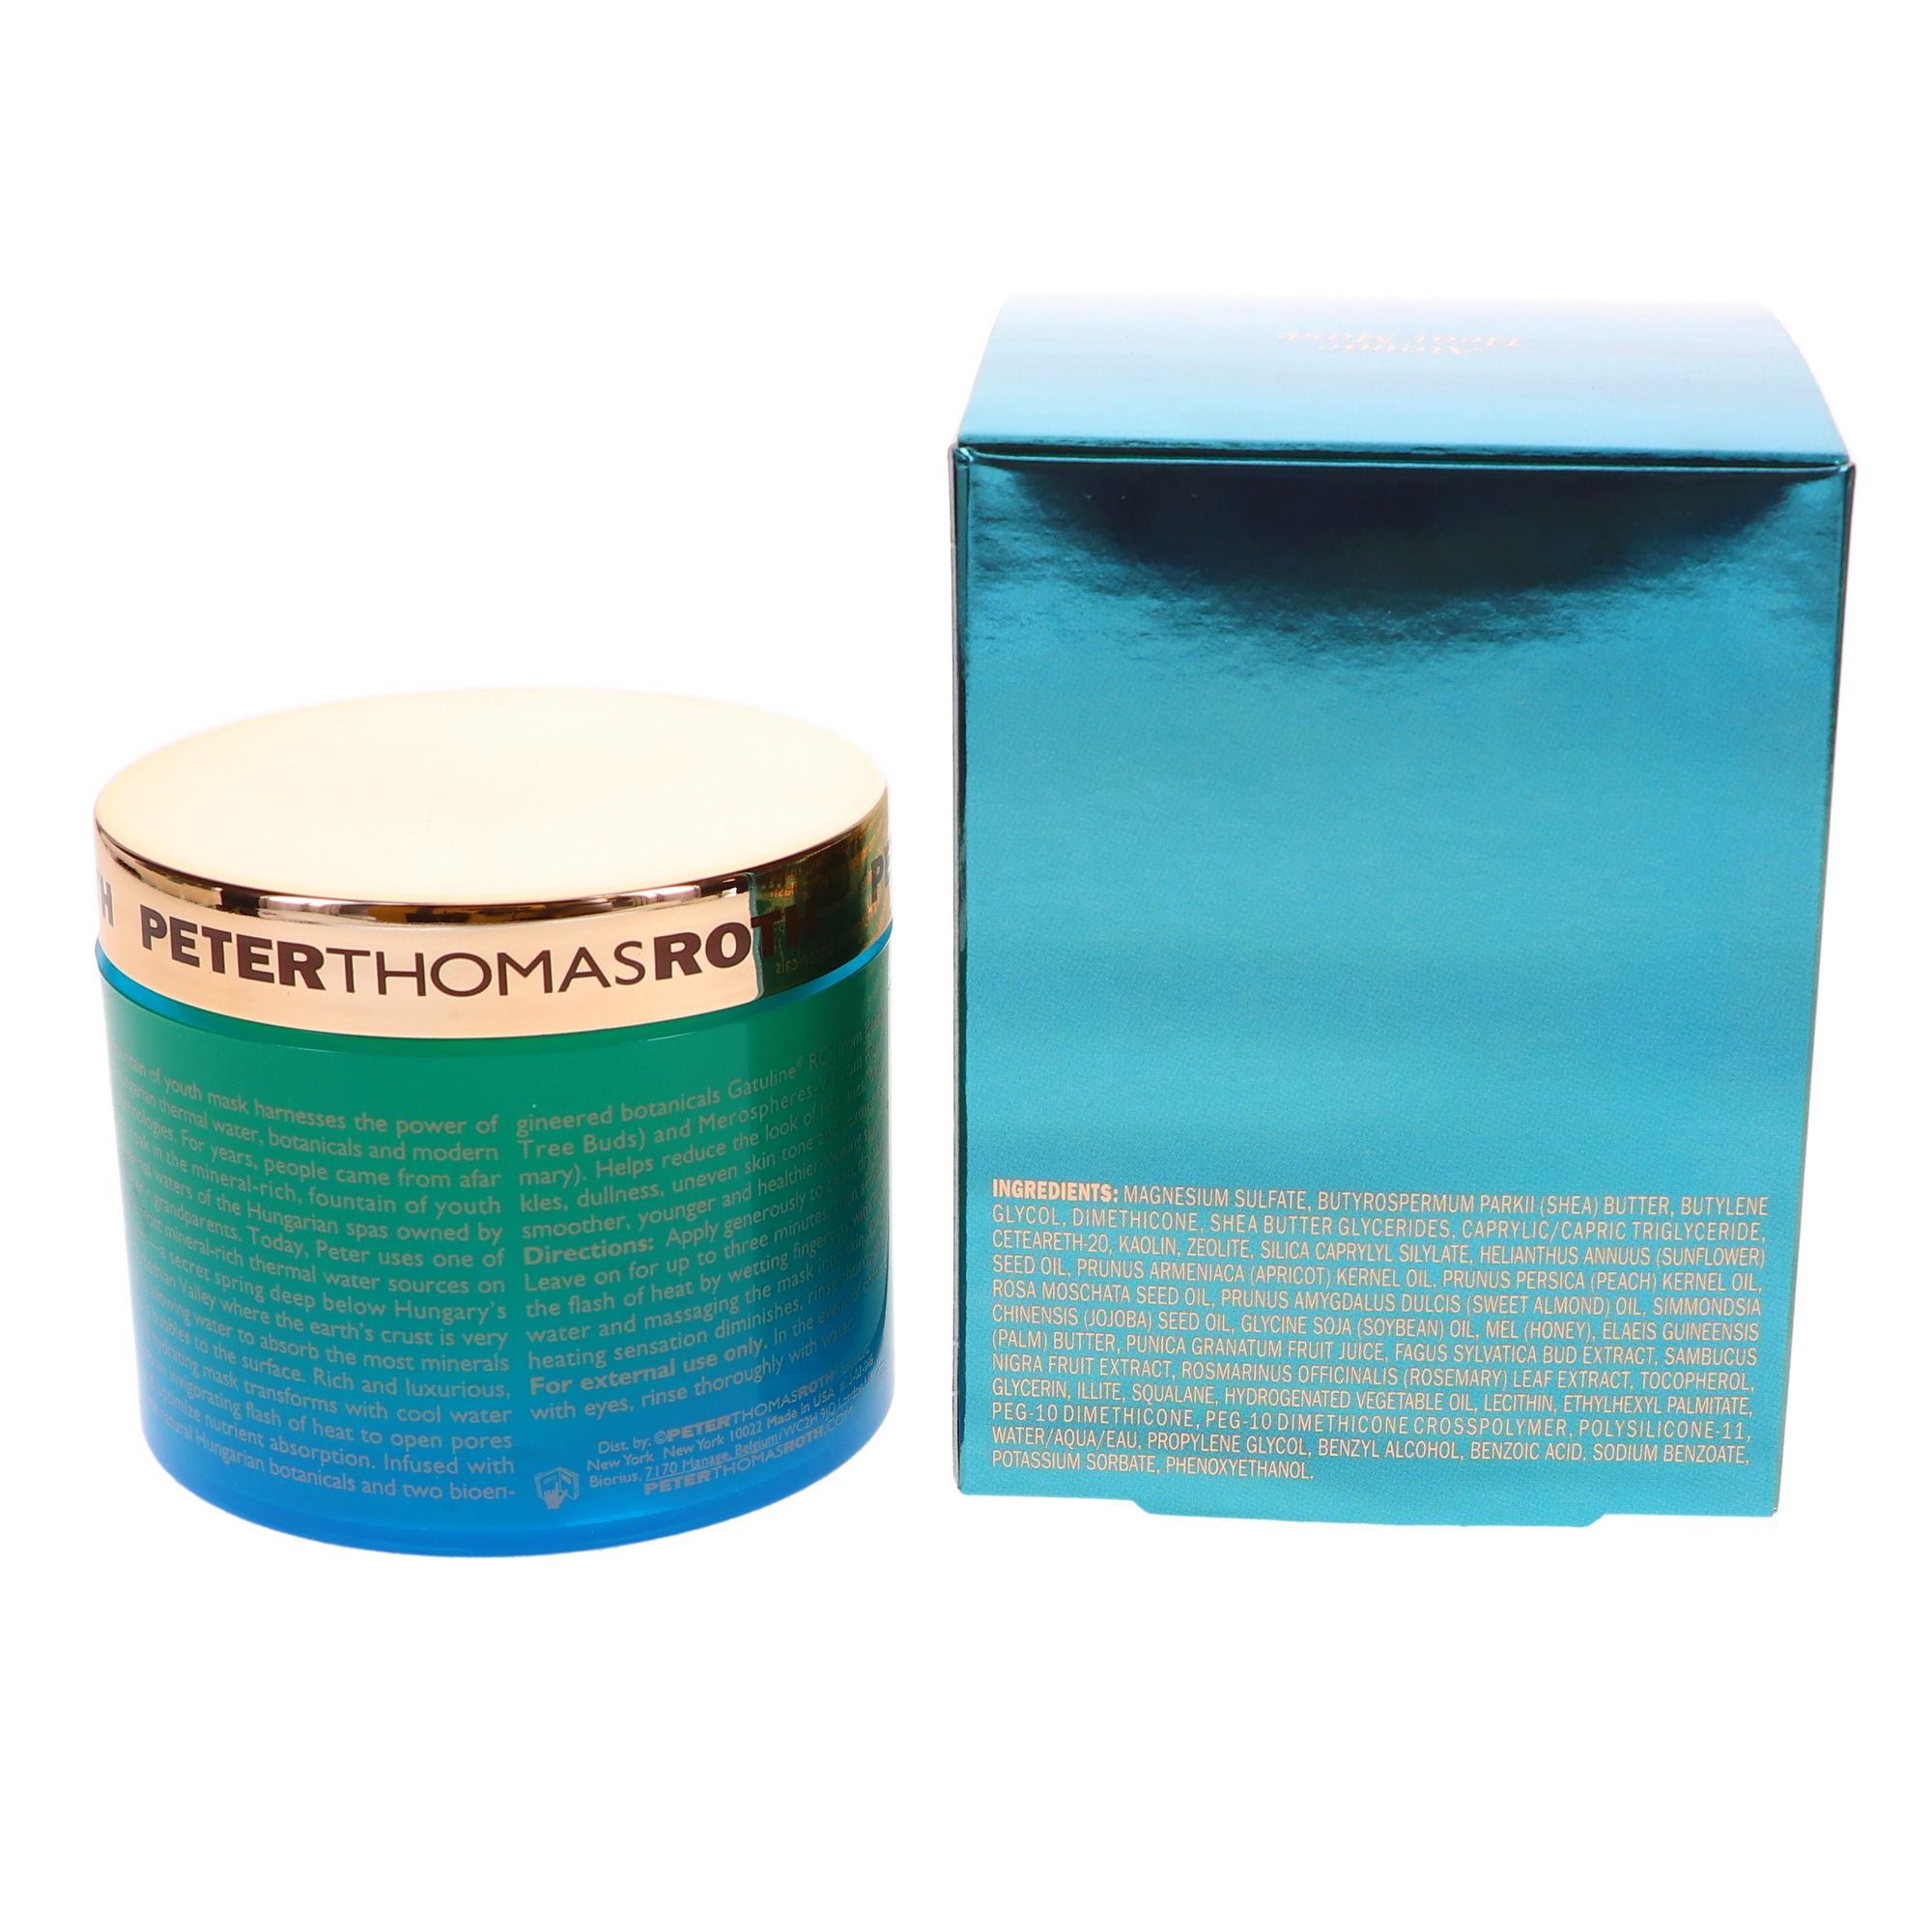 Peter Thomas Roth Hungarian Thermal Water Mineral Rich Atomic Heat Mask 5.1 oz - image 8 of 8